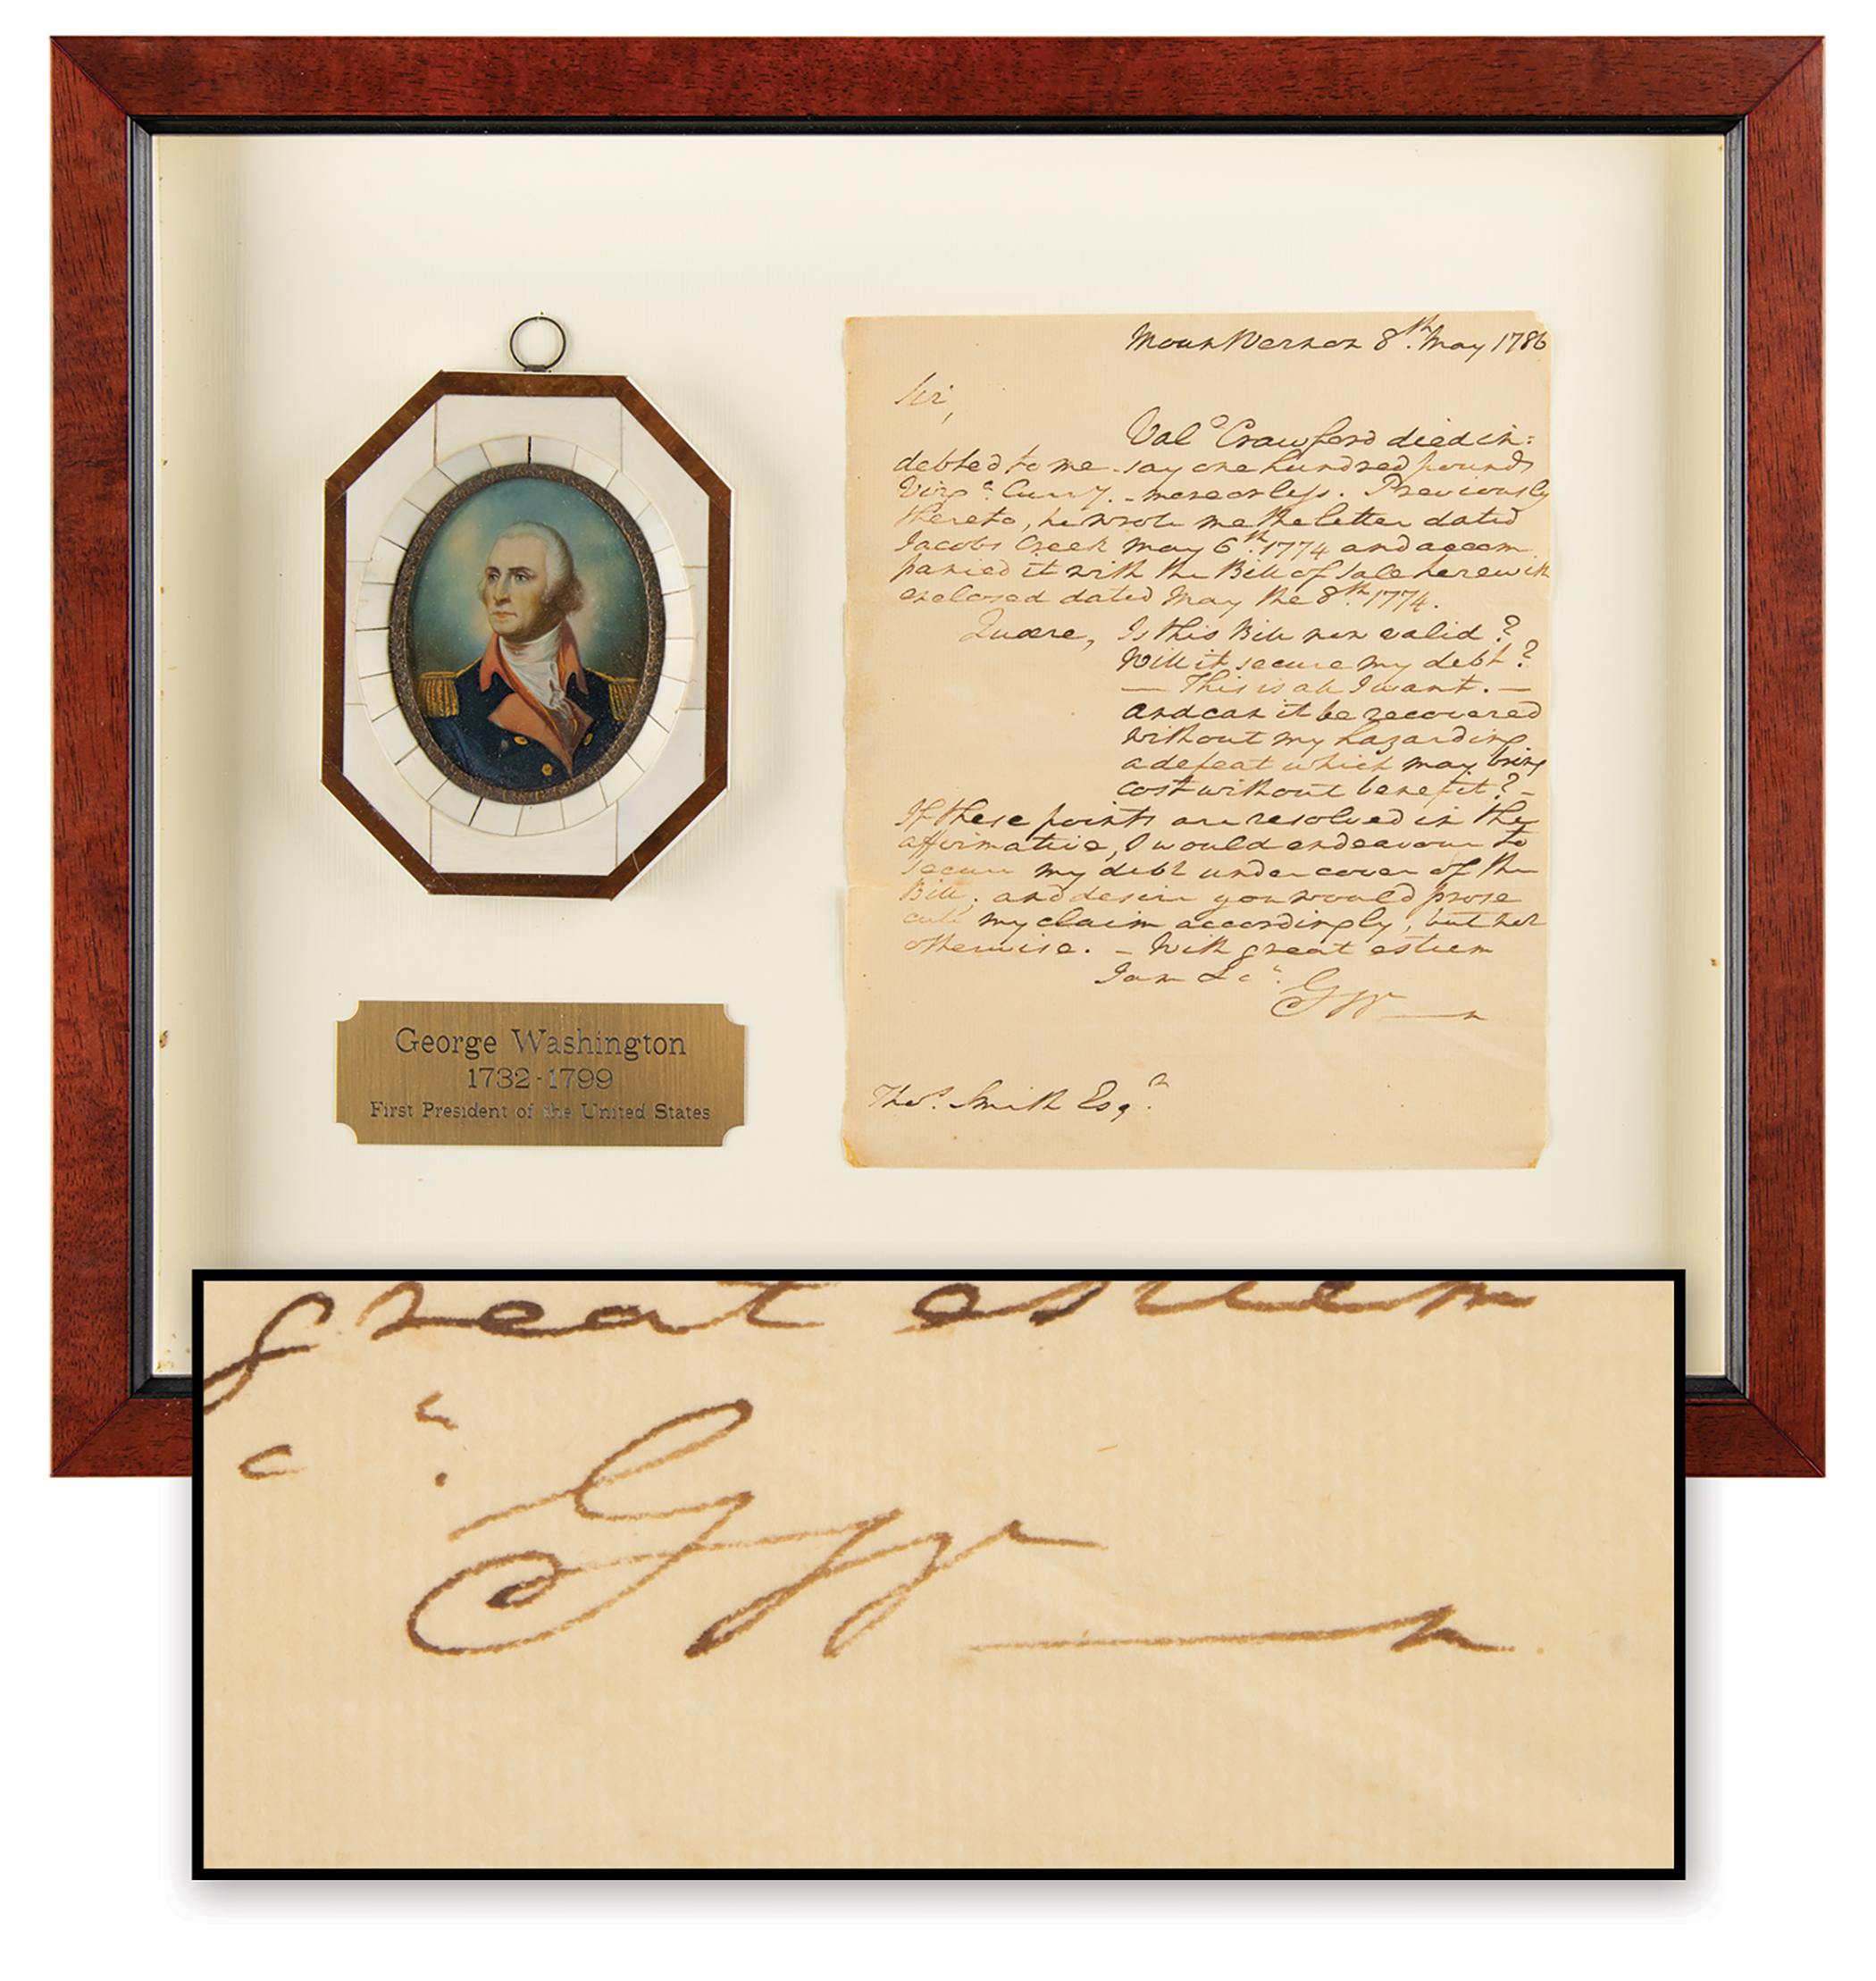 Lot #3 George Washington Autograph Letter Signed from Mount Vernon on Debt Collection